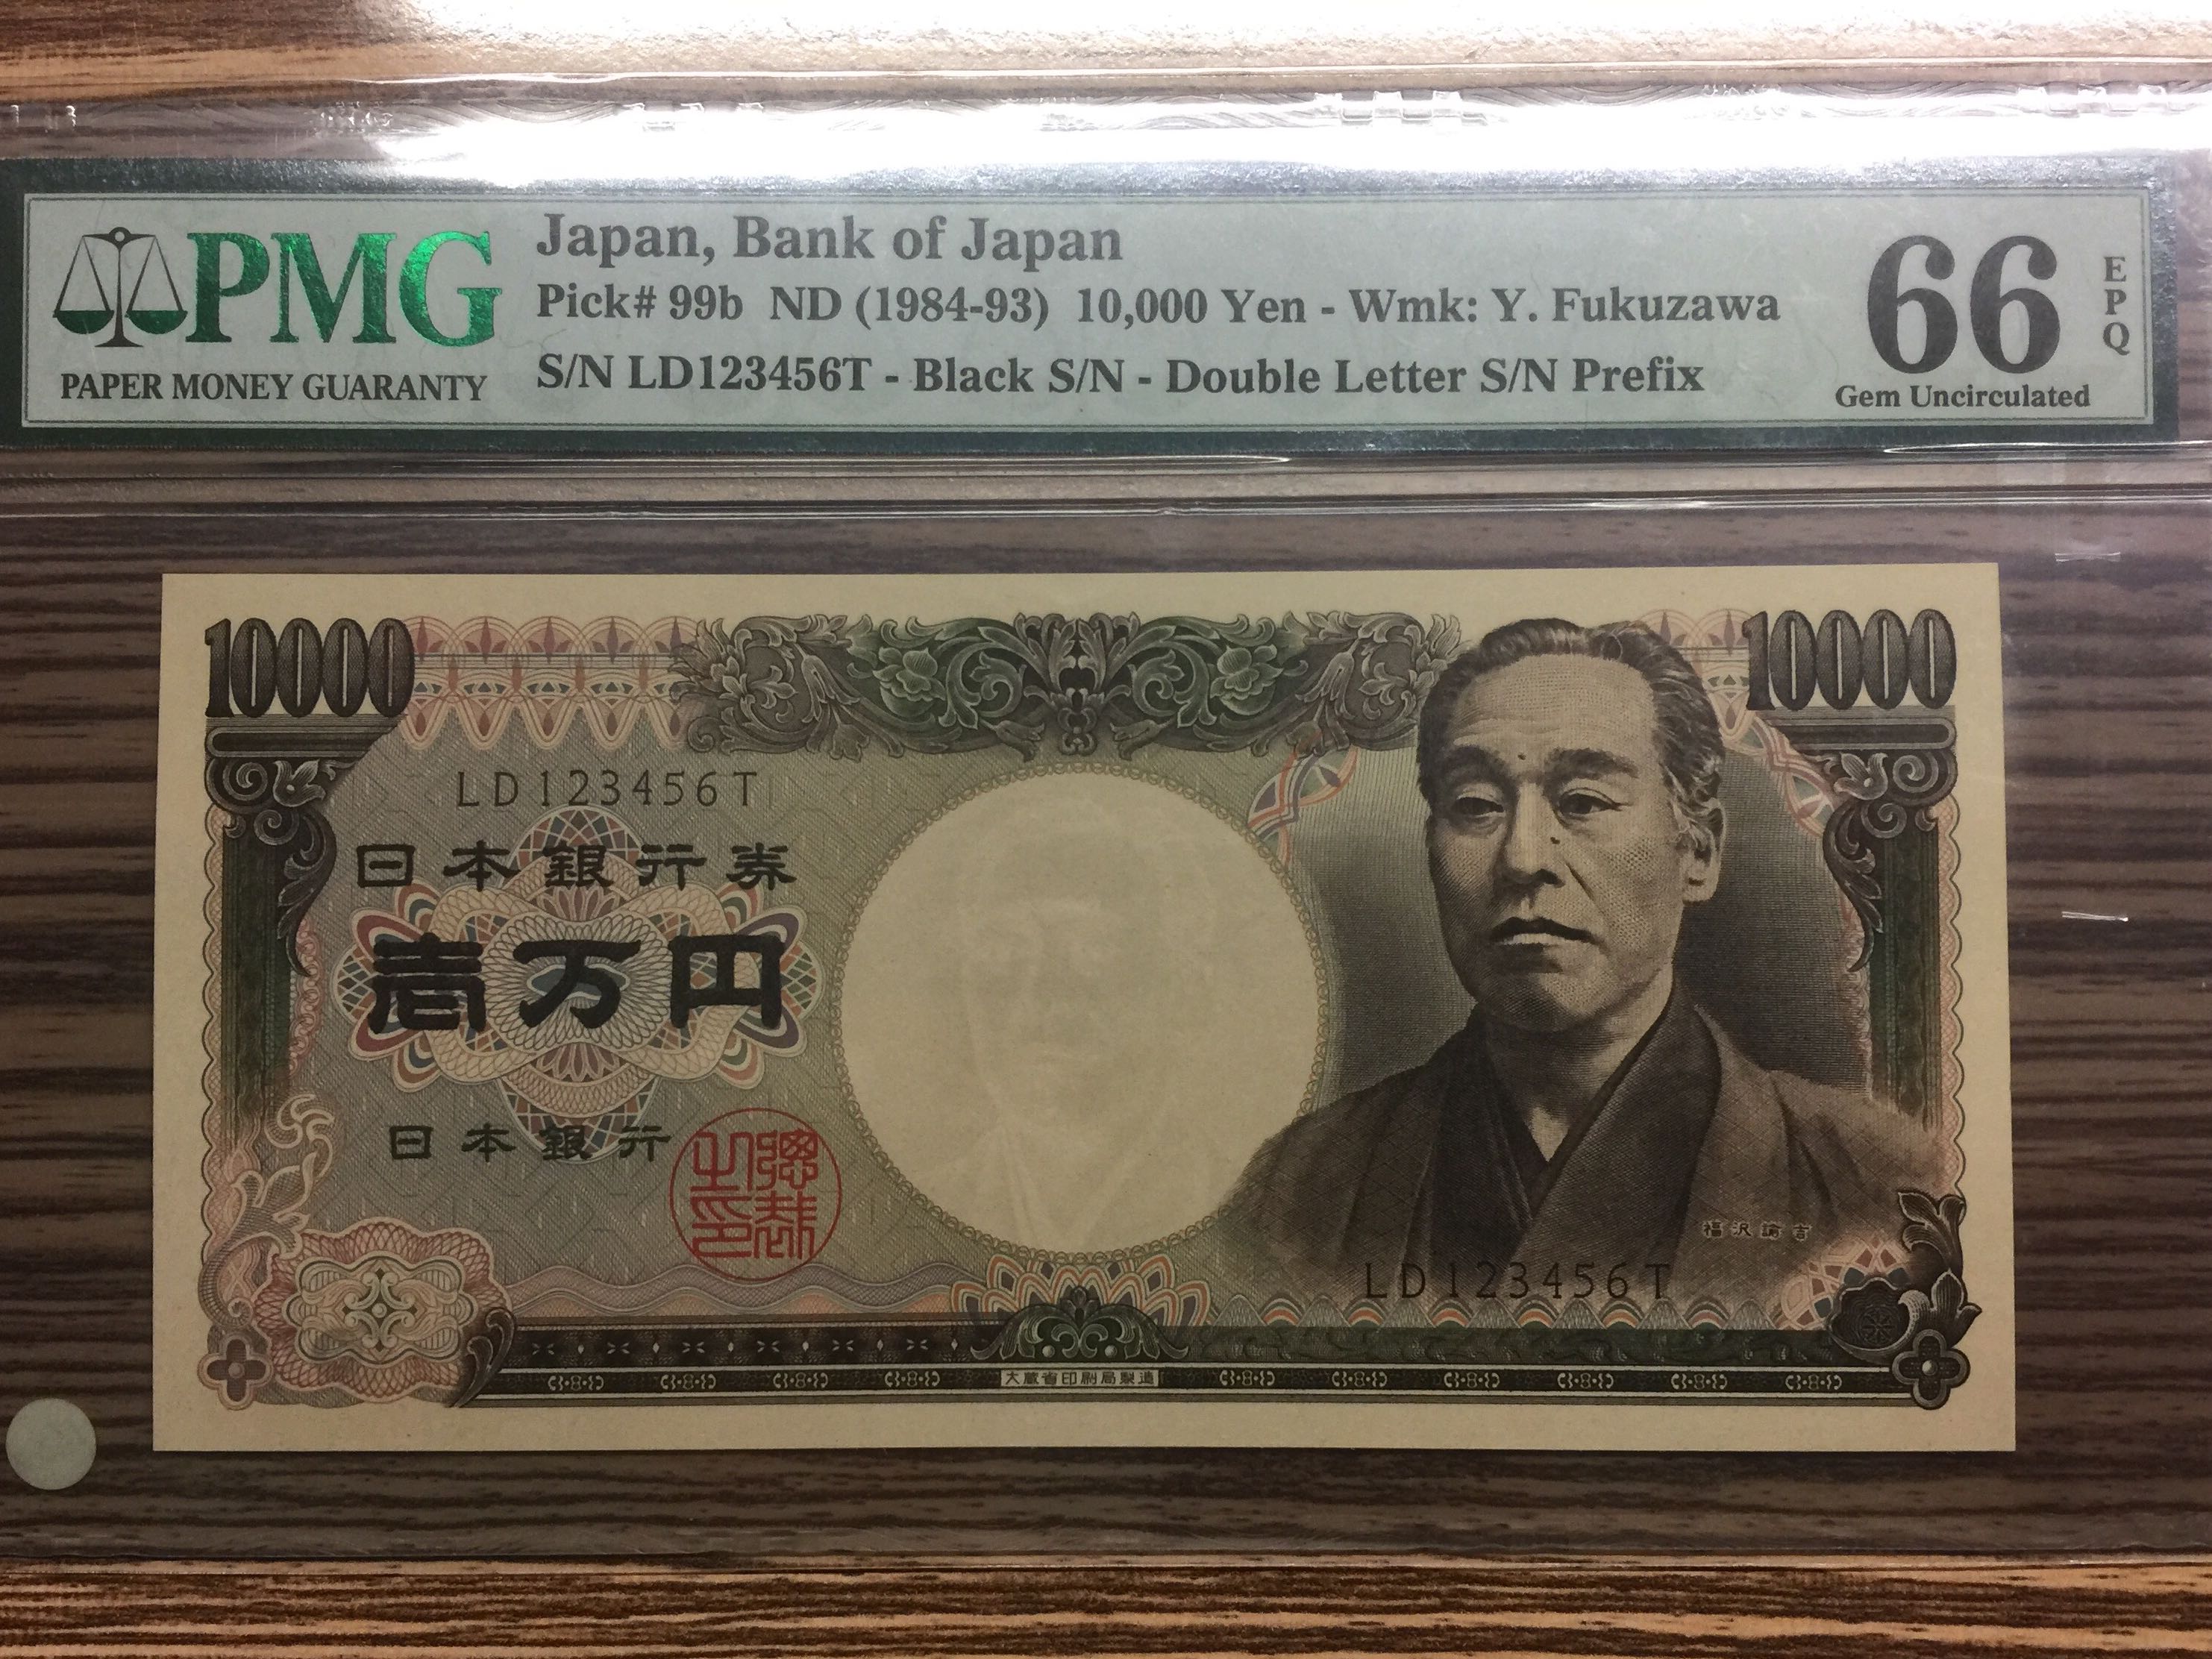 Japan 1984 10000 Yen Ladder 123456 Unc Note Hobbies Toys Memorabilia Collectibles Currency On Carousell